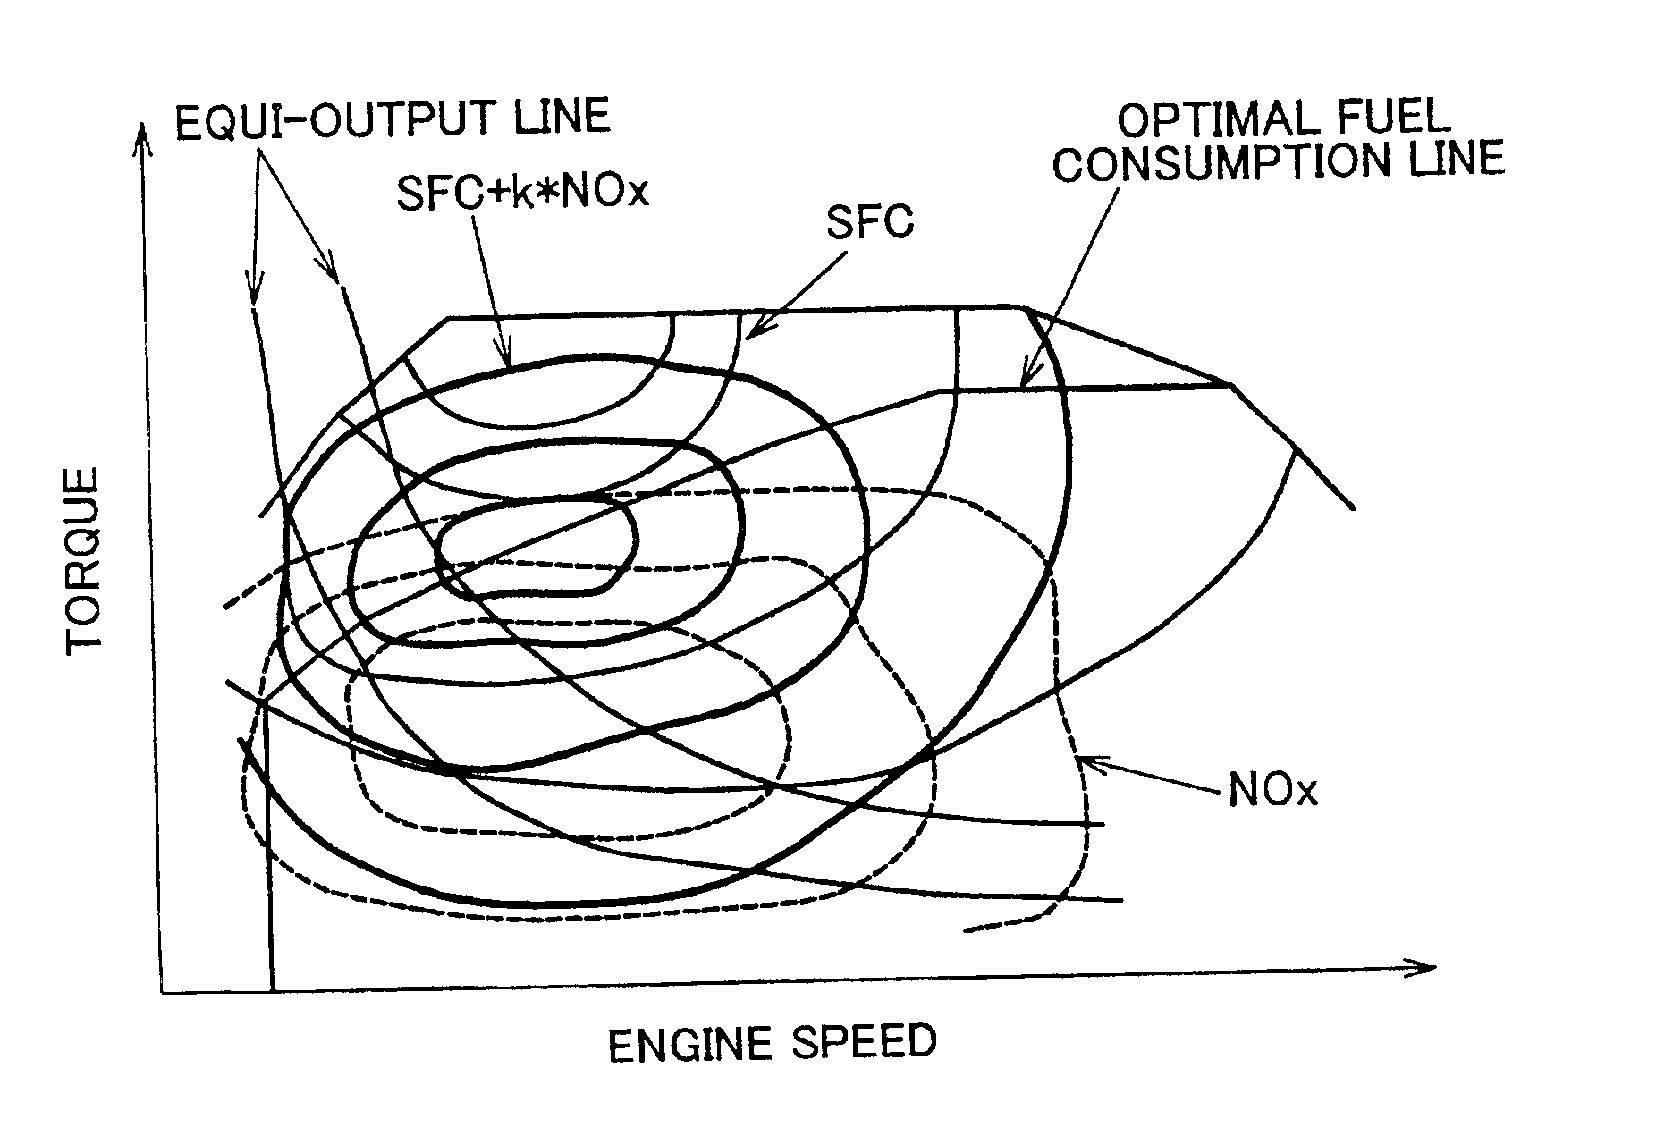 Control apparatus and method for vehicle having internal combustion engine and continuously variable transmission, and control apparatus and method for internal combustion engine